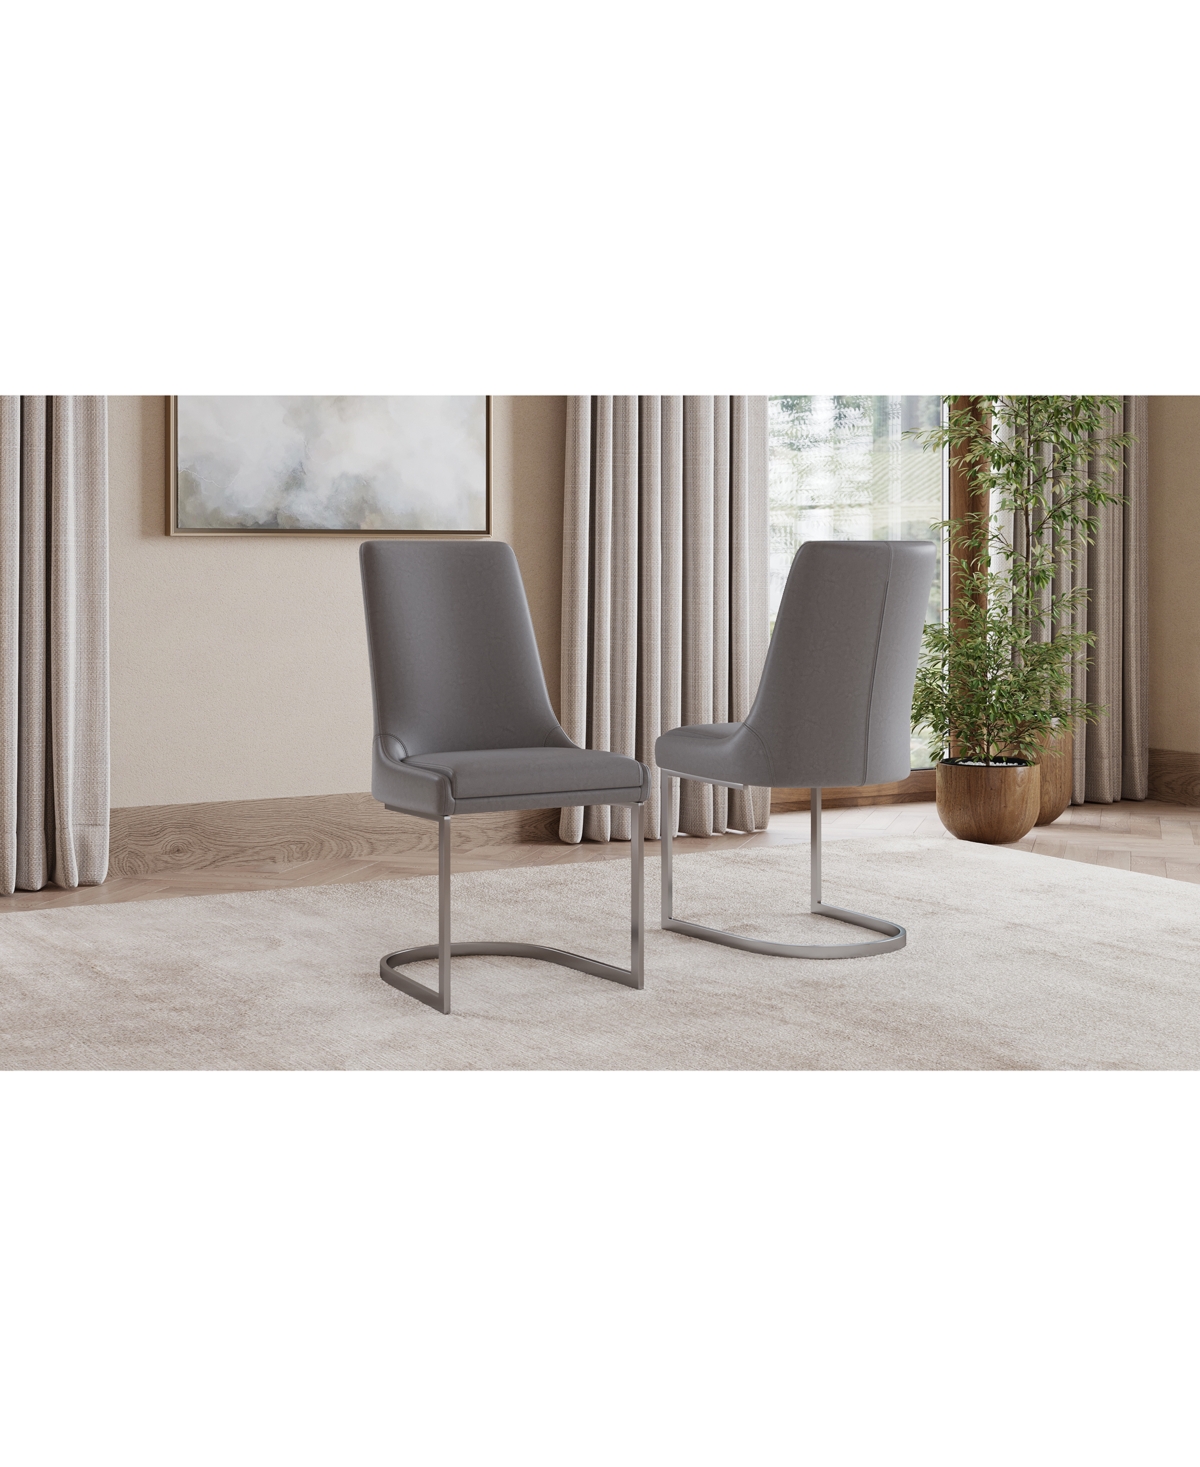 Macy's Tivie Dining Chair 2pc Set In Charcoal